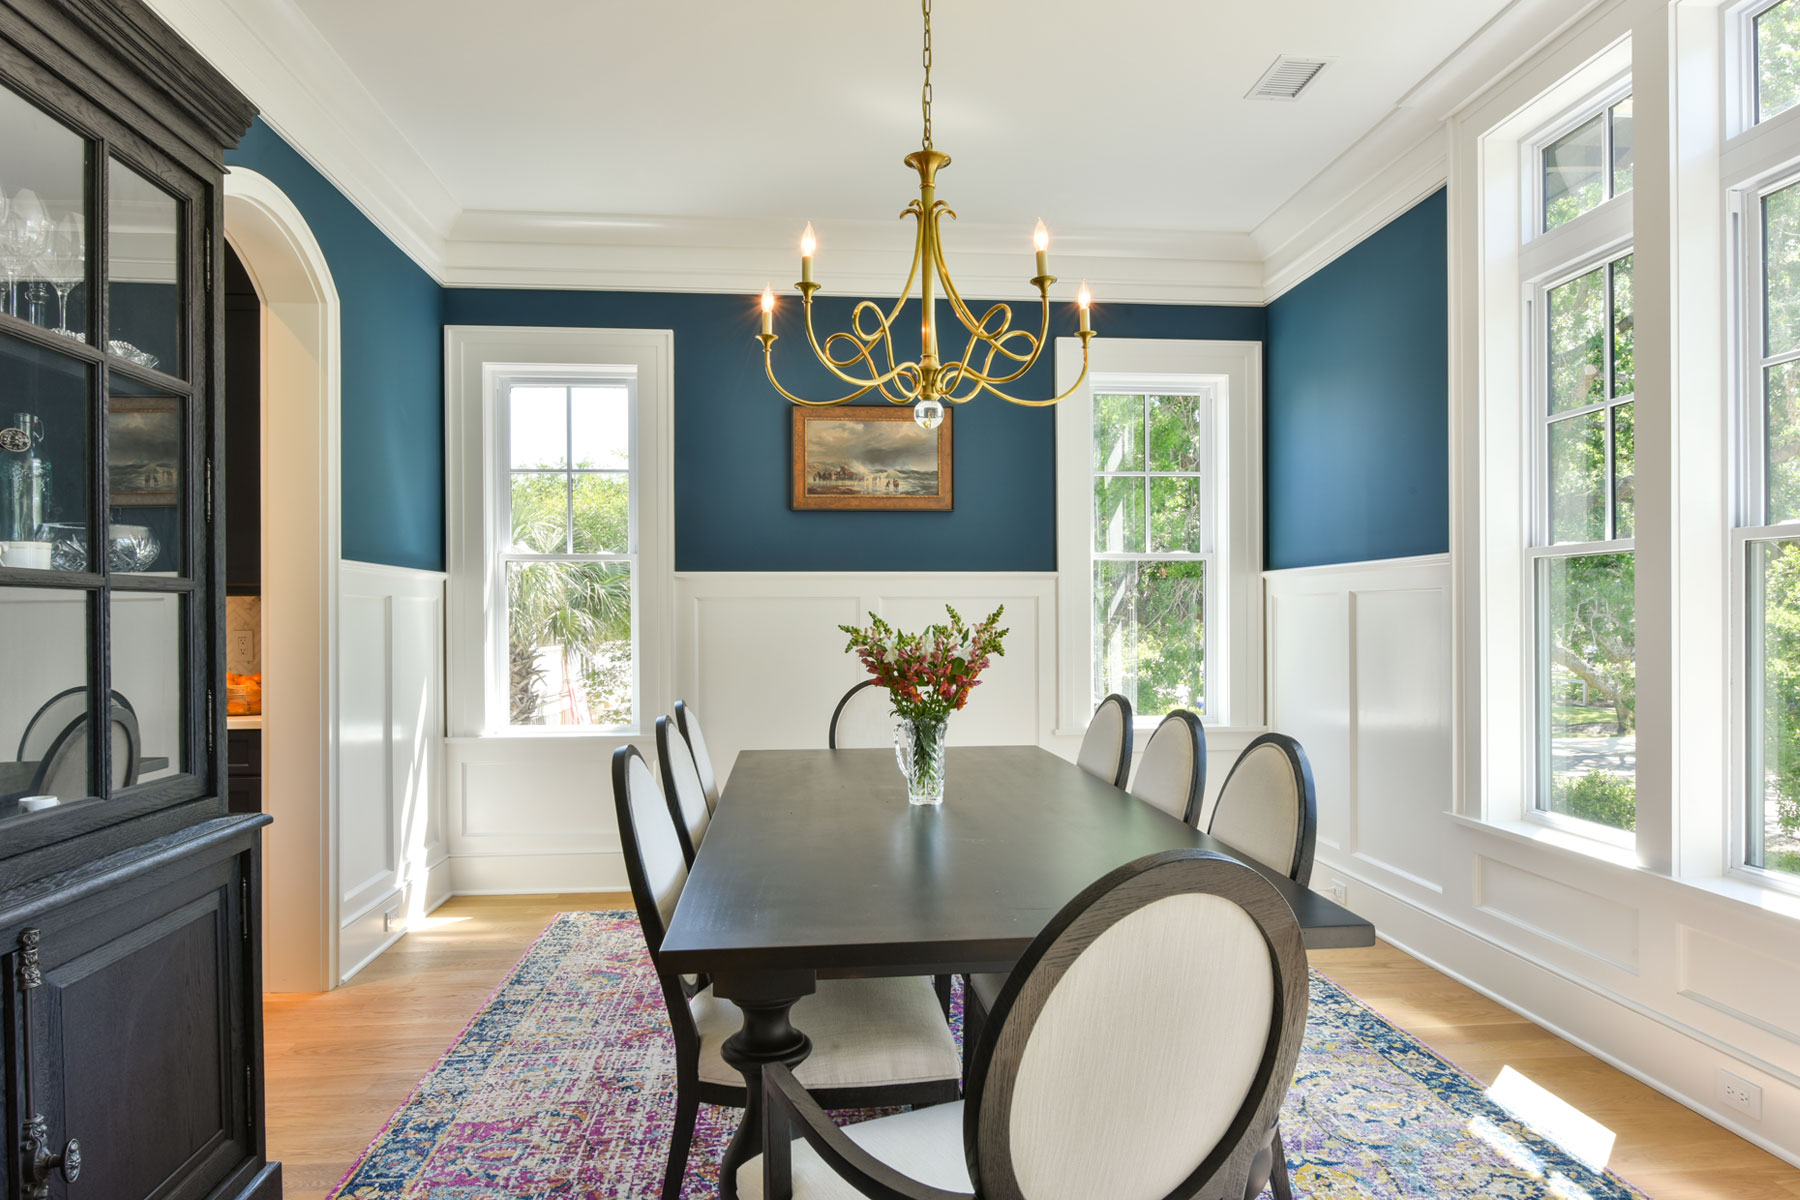 Formal dining room with white board and batten and blue painted walls